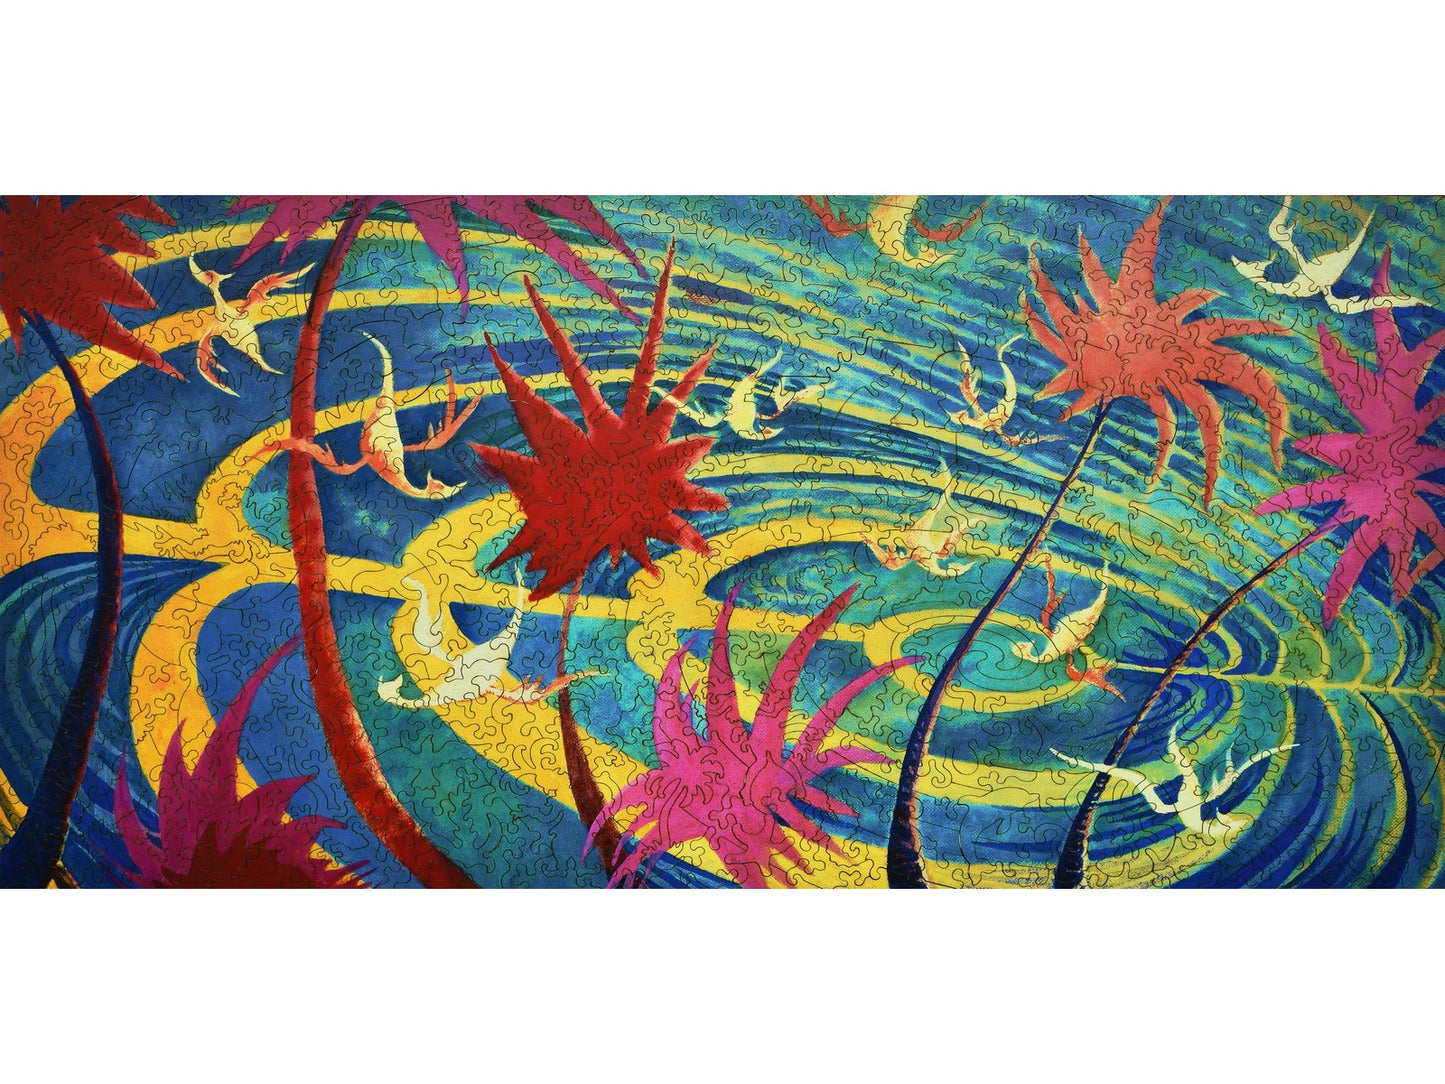 The front of the puzzle, Tahitian Landscape, which shows palm trees and birds over a blue and yellow abstract pattern.